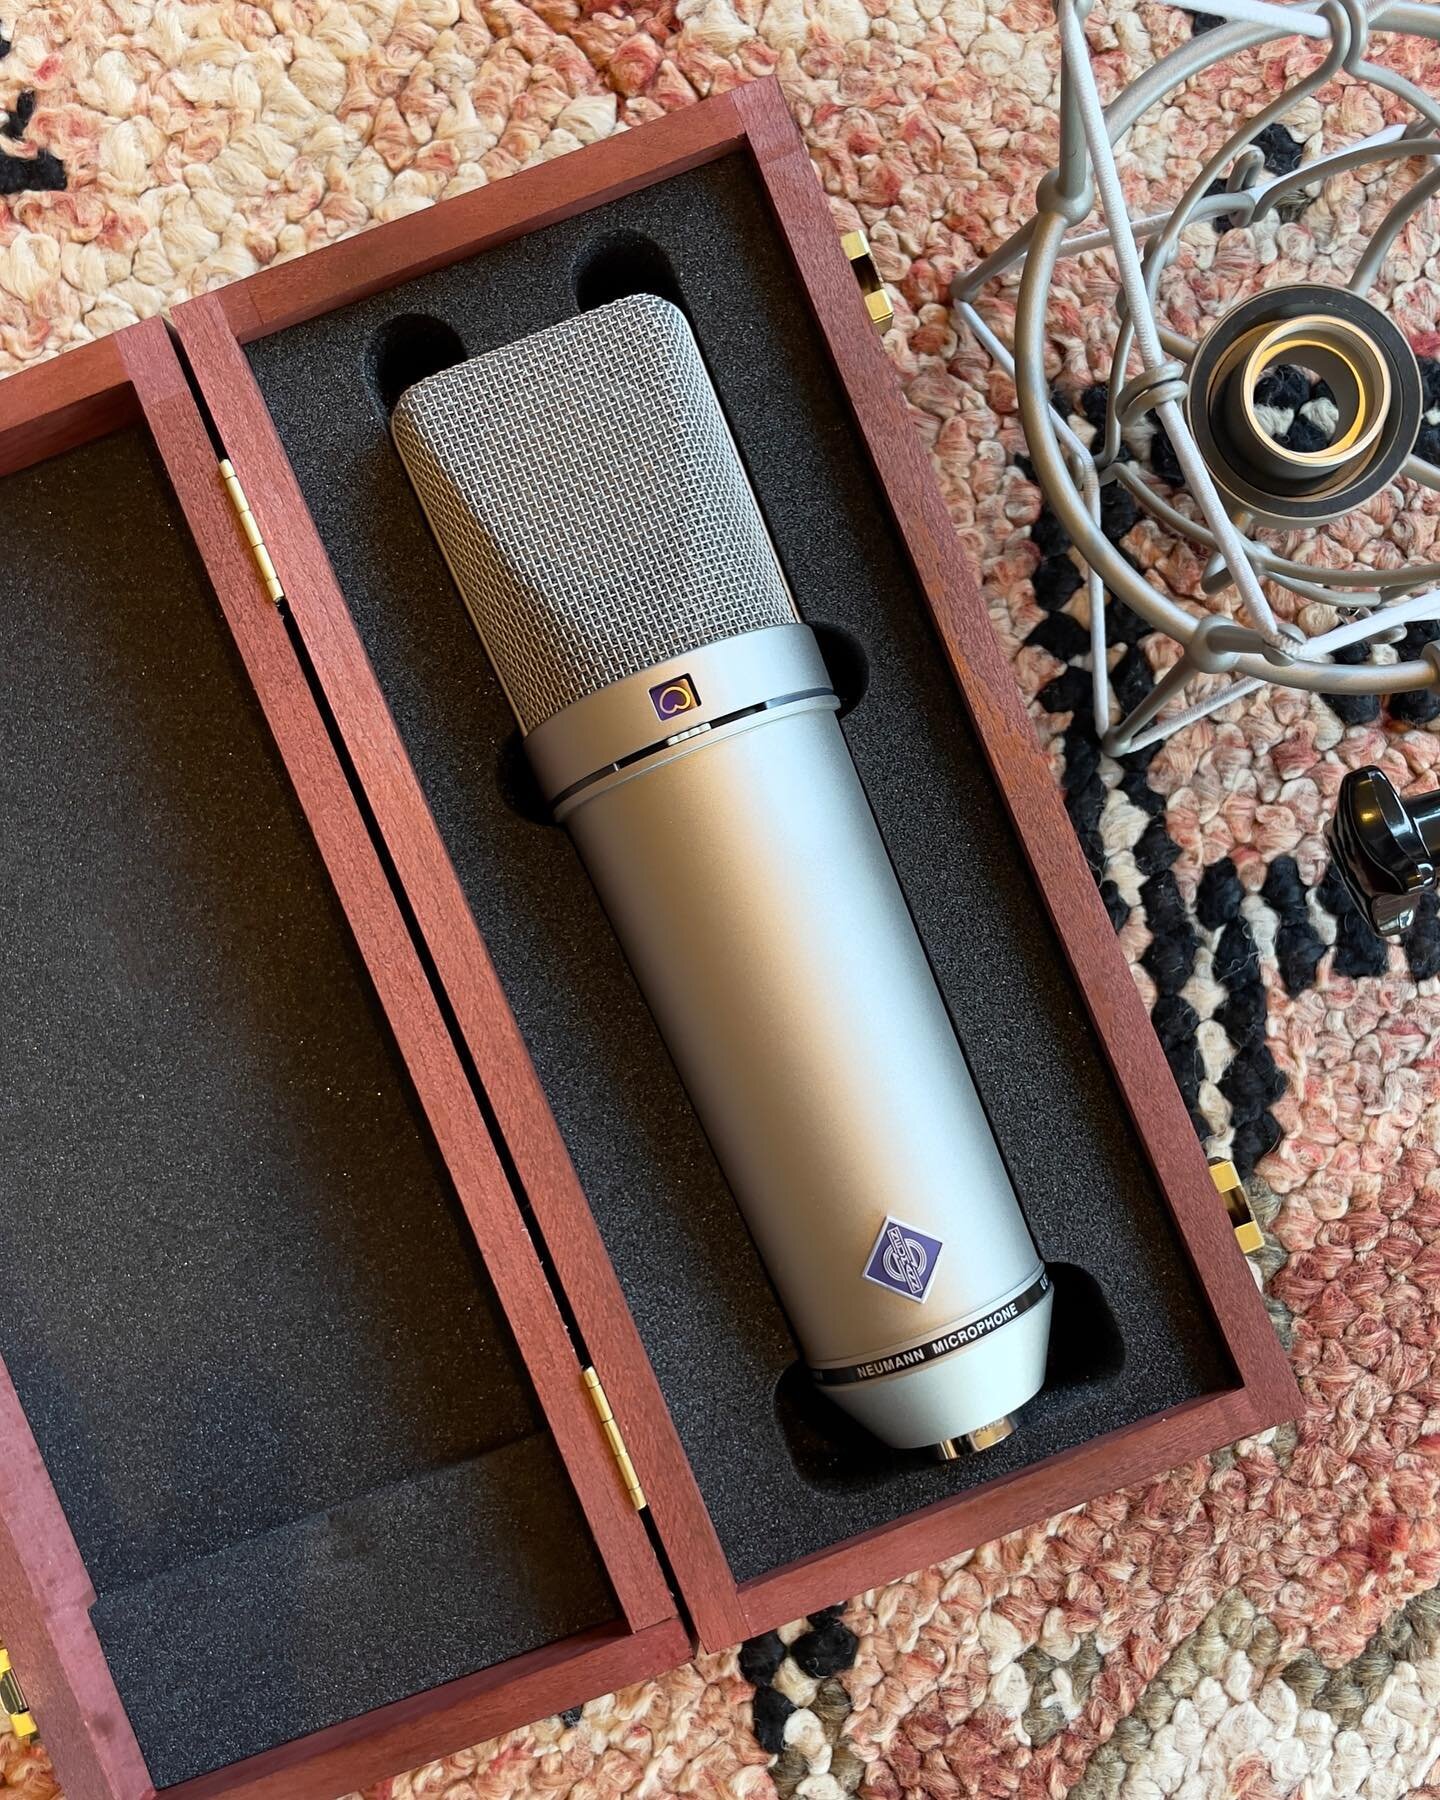 Good things come in wood boxes.
@neumann.berlin